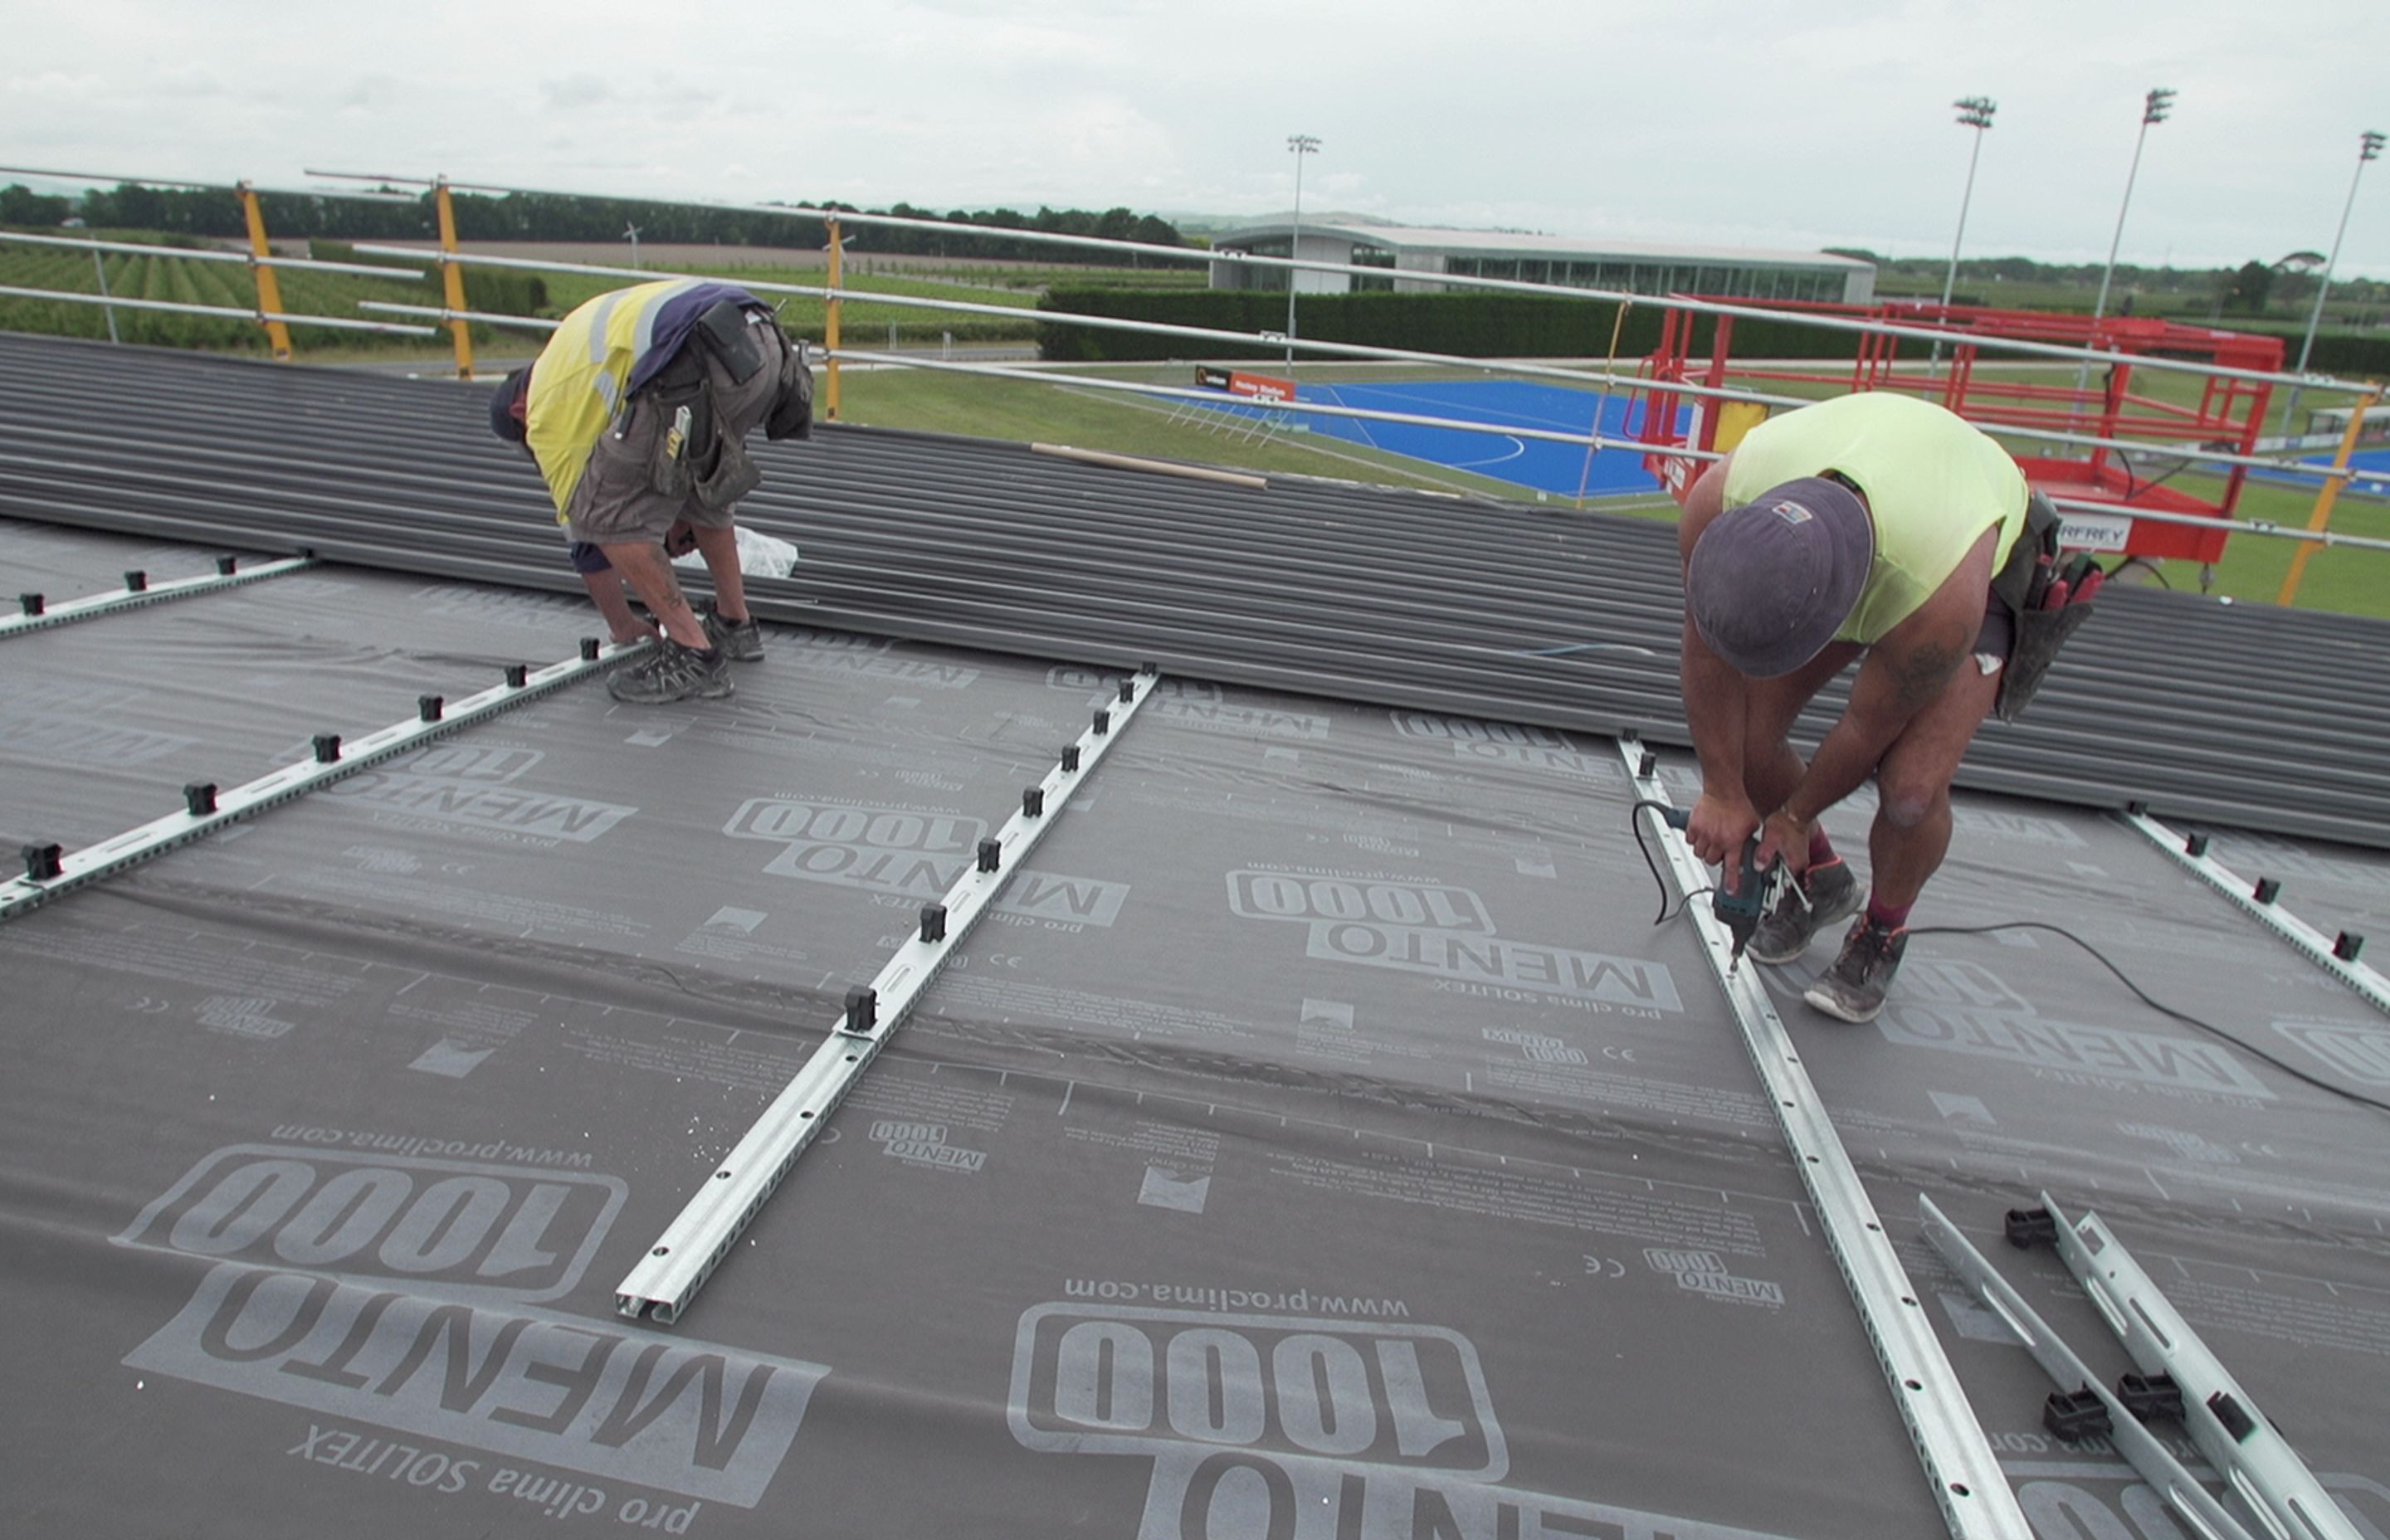 The Tricore Roofing System comprises a pre-finished lining sheet, perforated roof rail, underlay and top sheet.